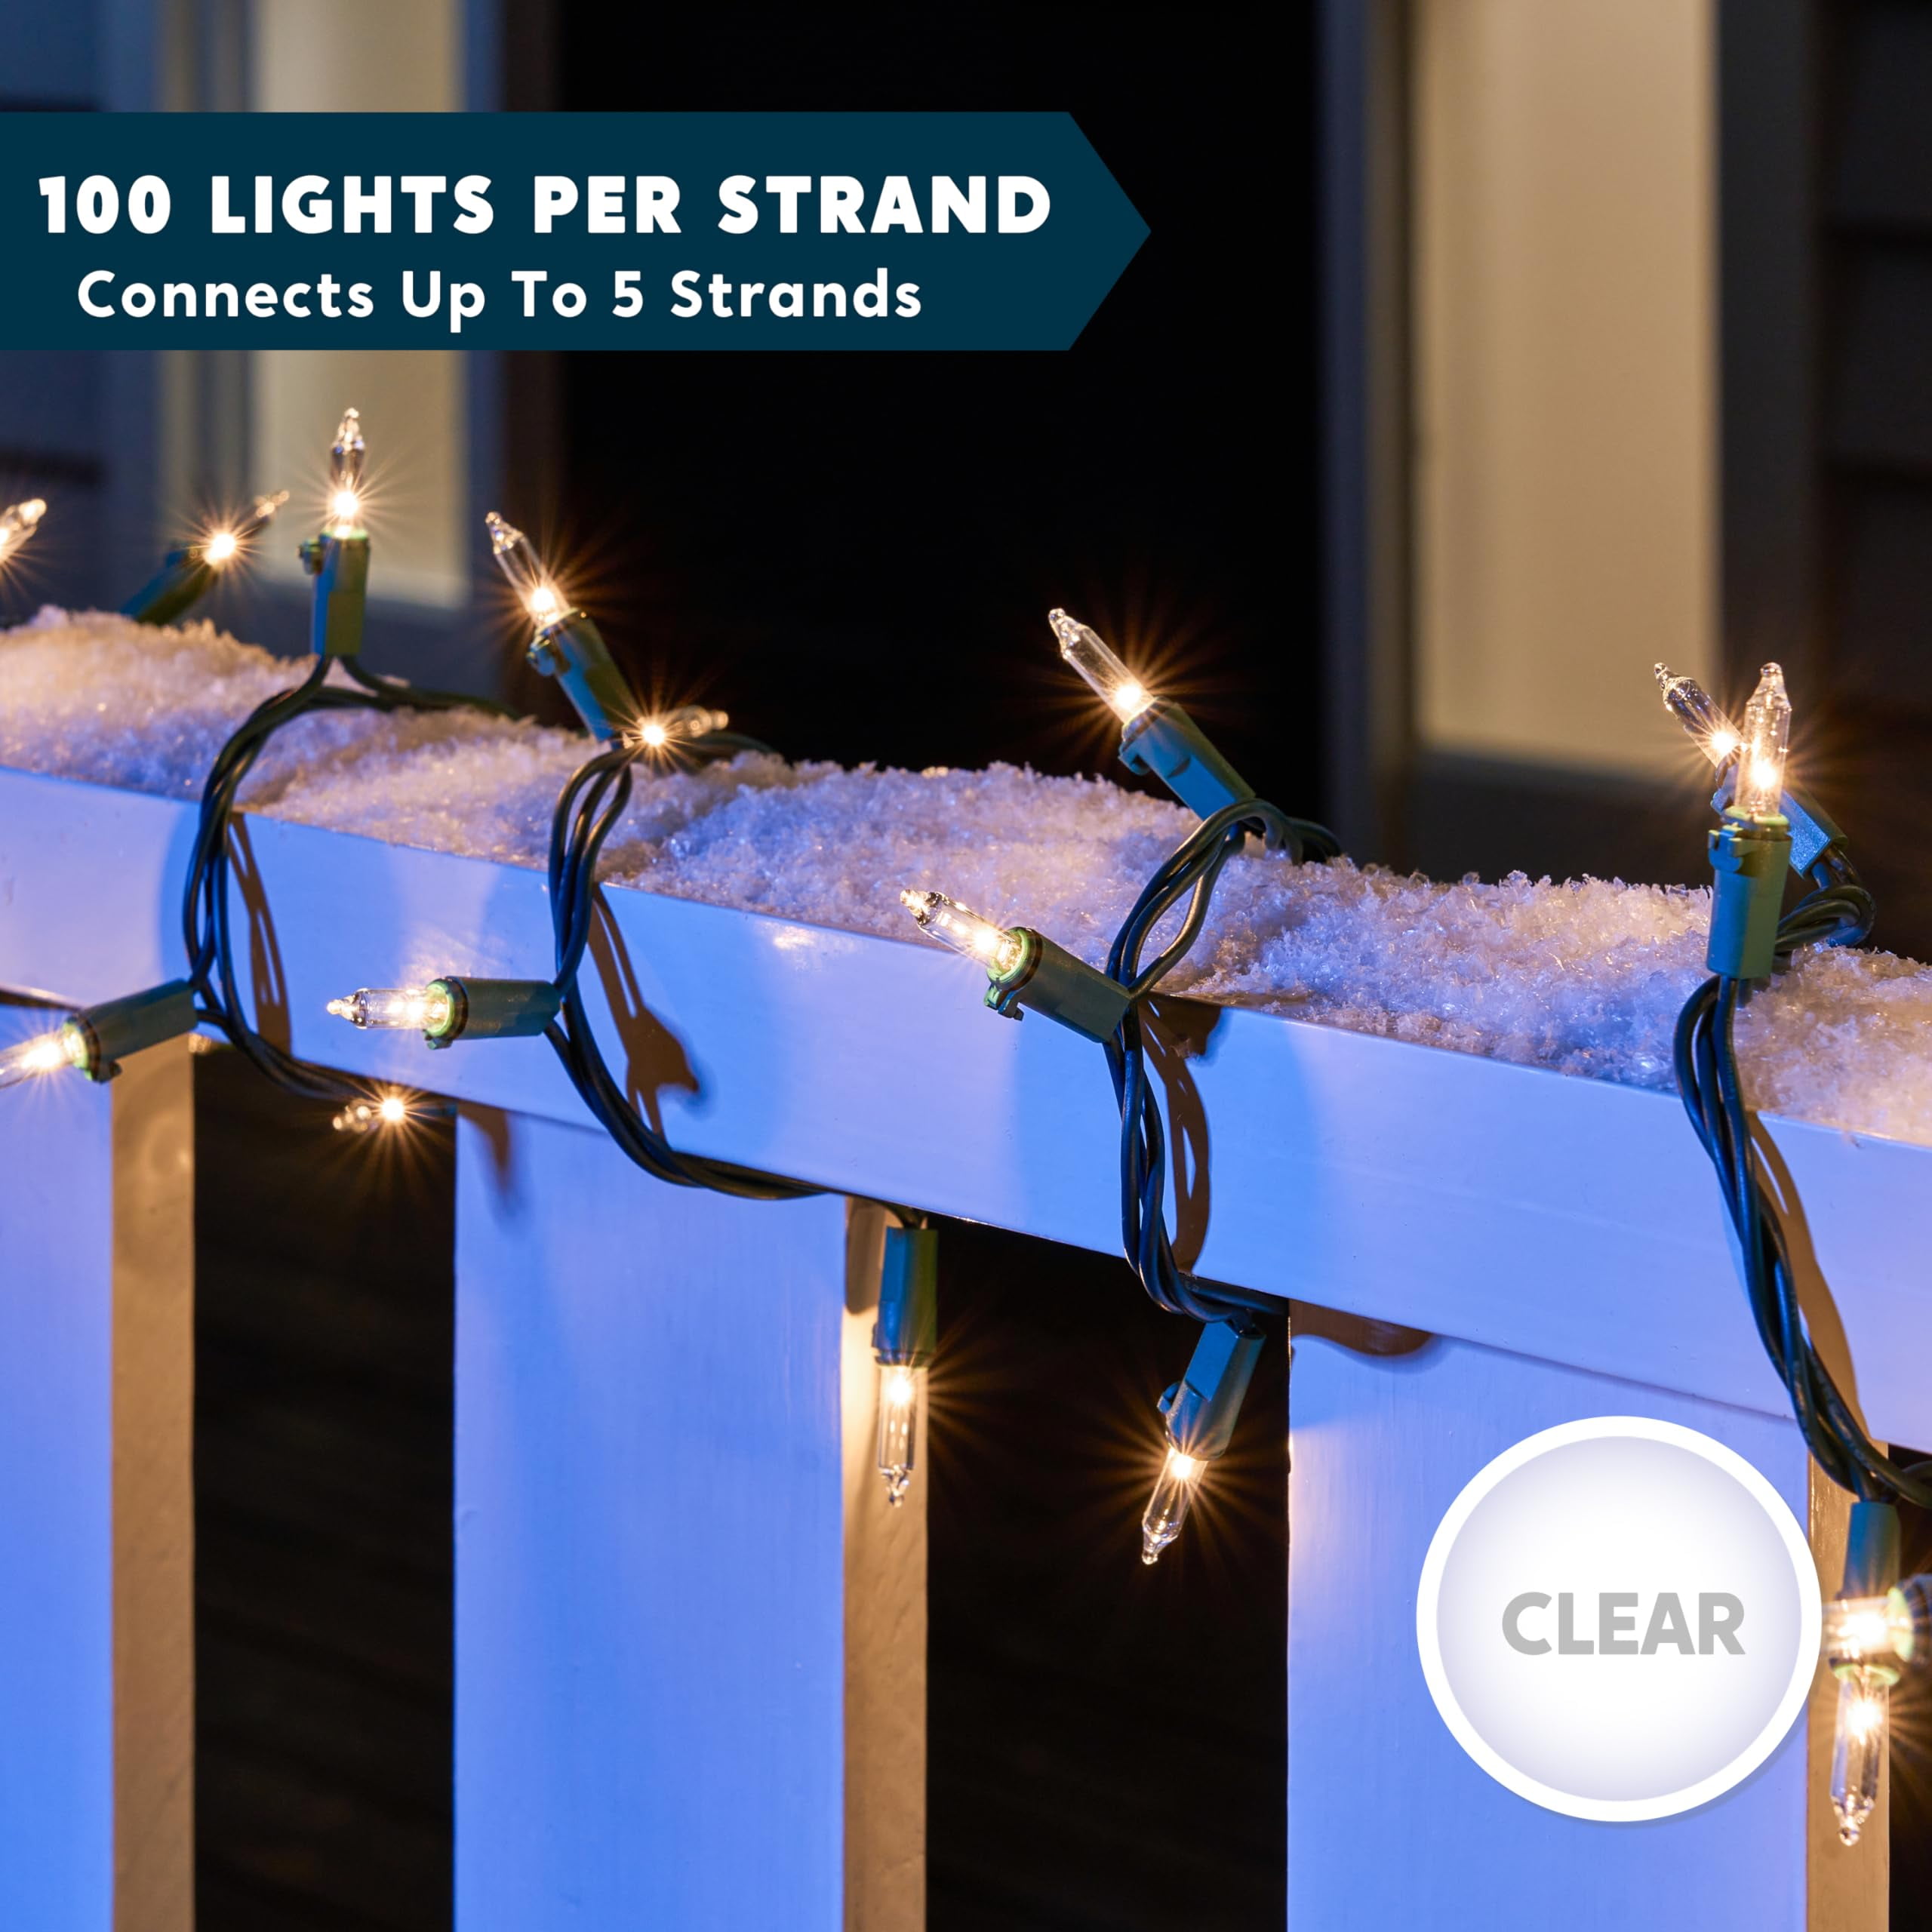 1000 LED Christmas Lights [Cool White] 400ft Super Long String Lights -  Remote with 8 Modes/Timer/di…See more 1000 LED Christmas Lights [Cool  White]